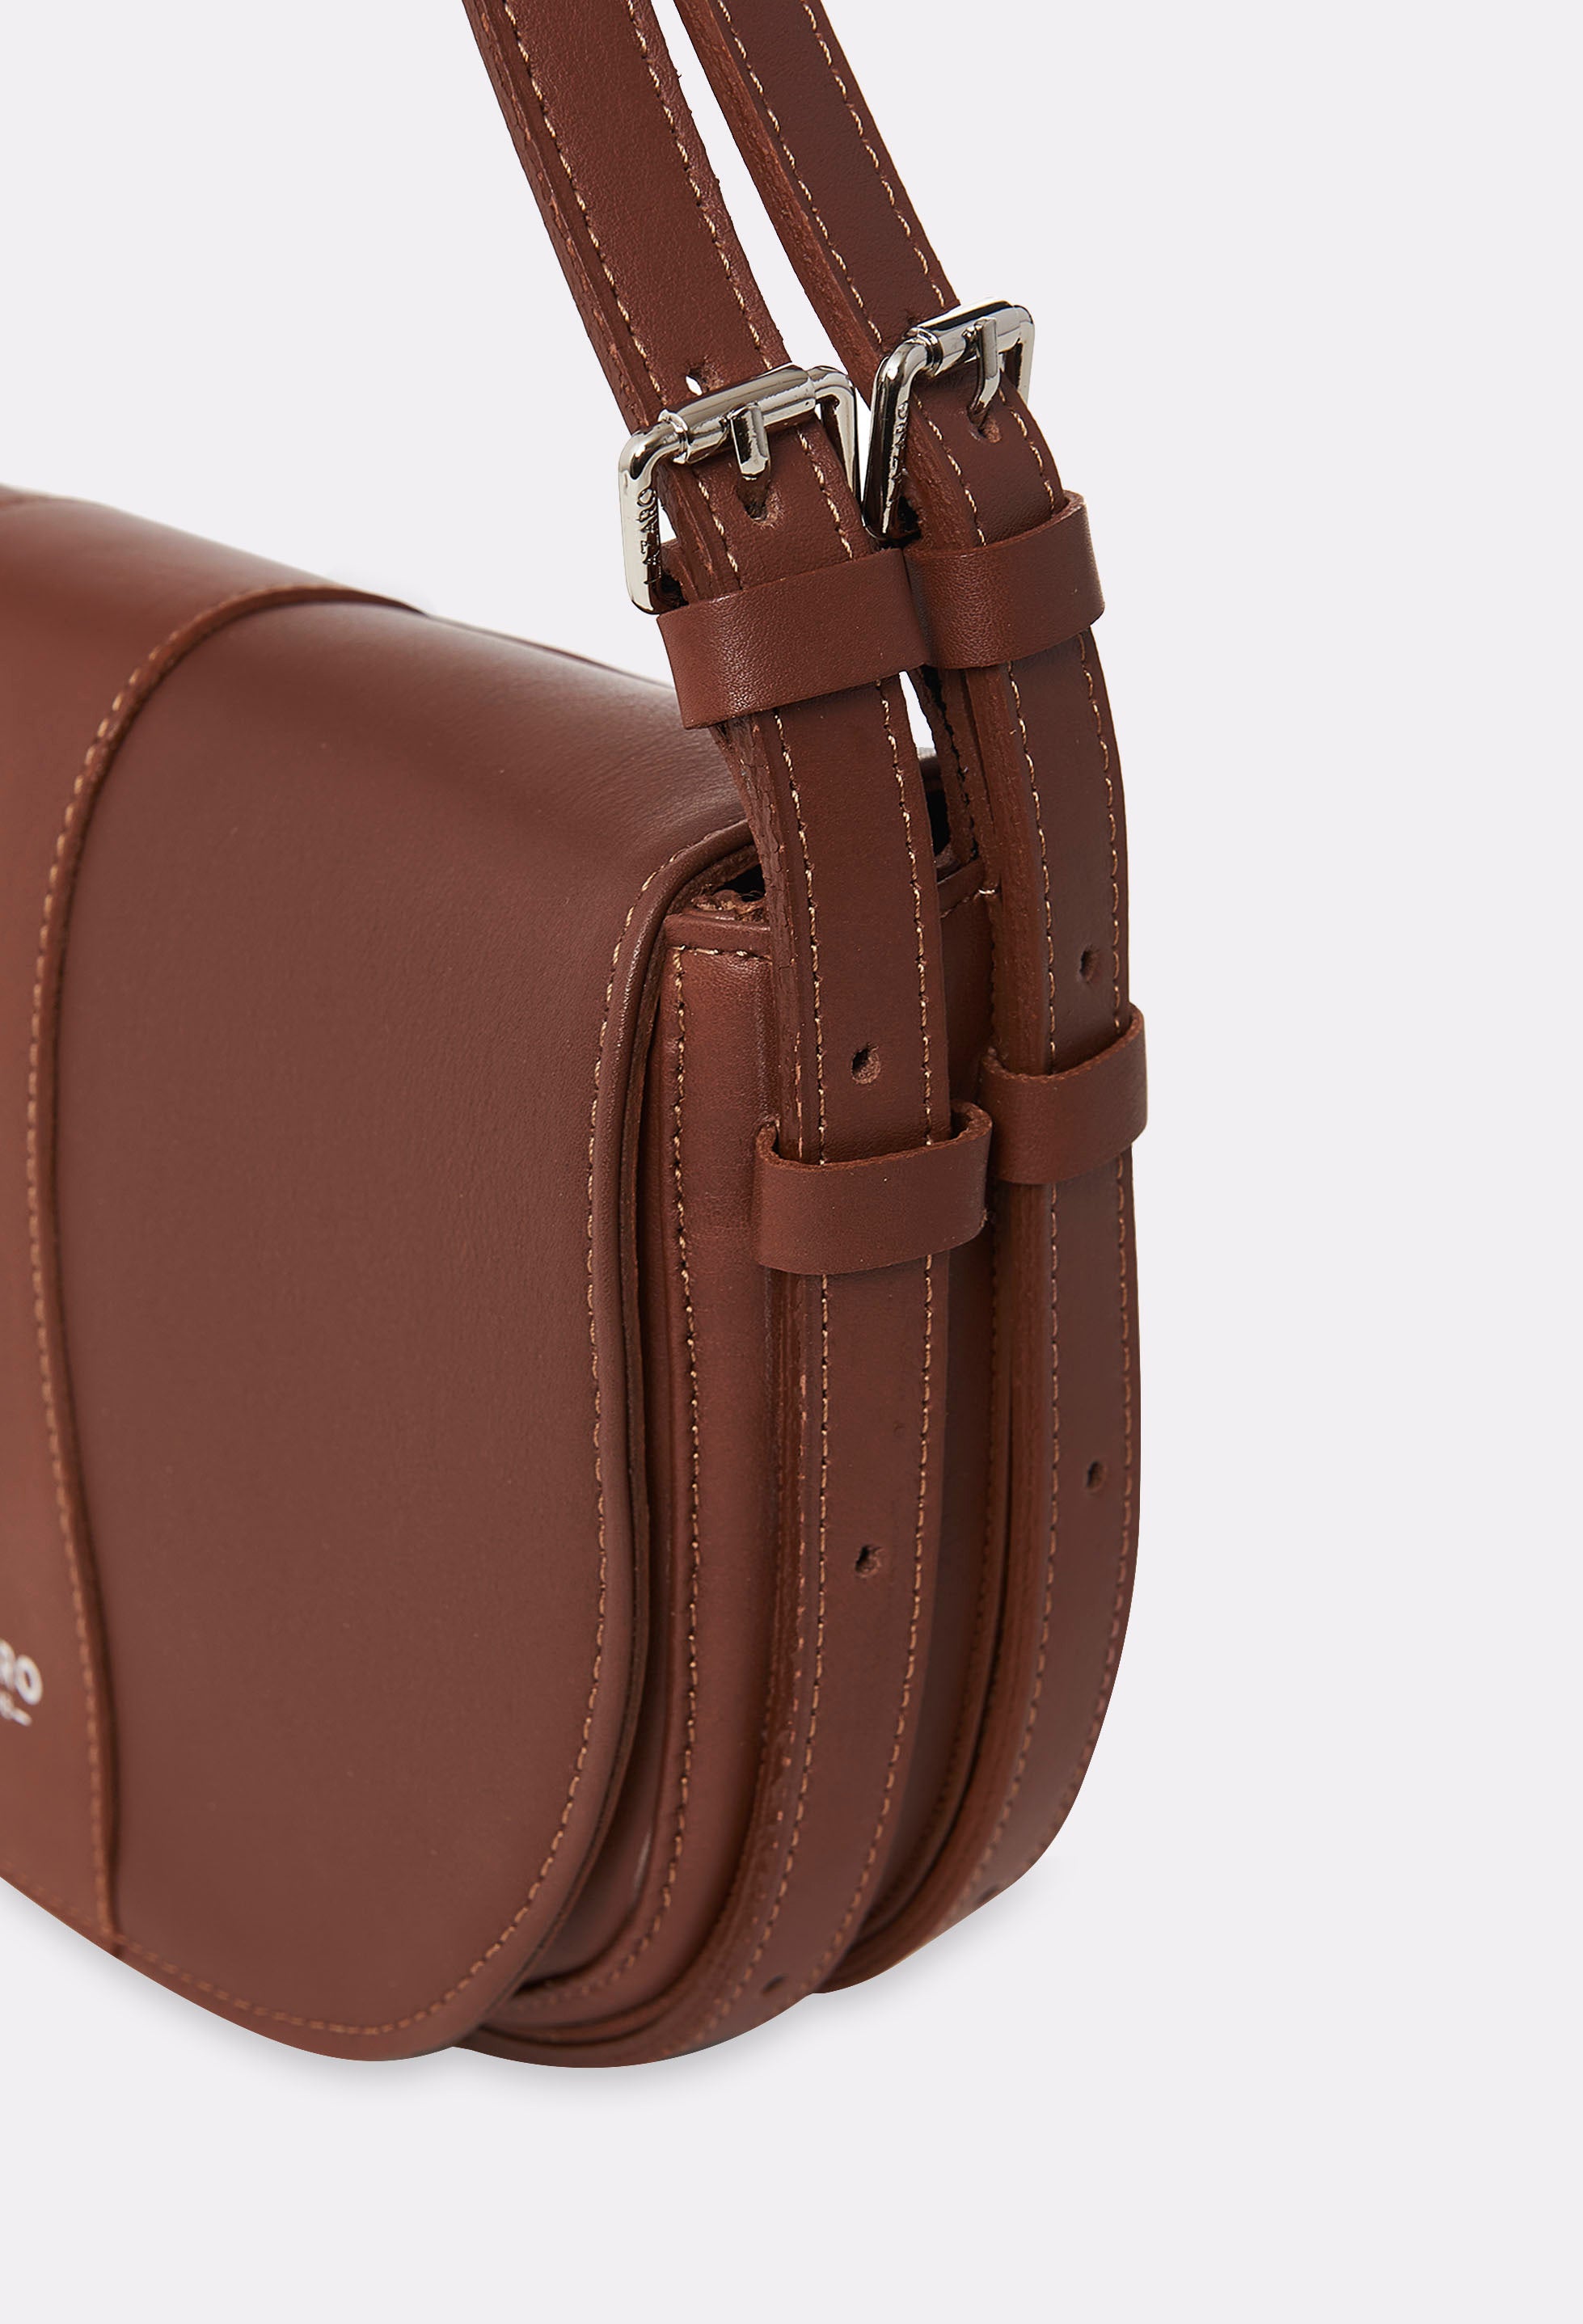 Partial photo of a Cognac Leather Shoulder Bag Montana with silver embossed Lazaro logo and double leather strap, equipped with metal buckles and cufflinks.